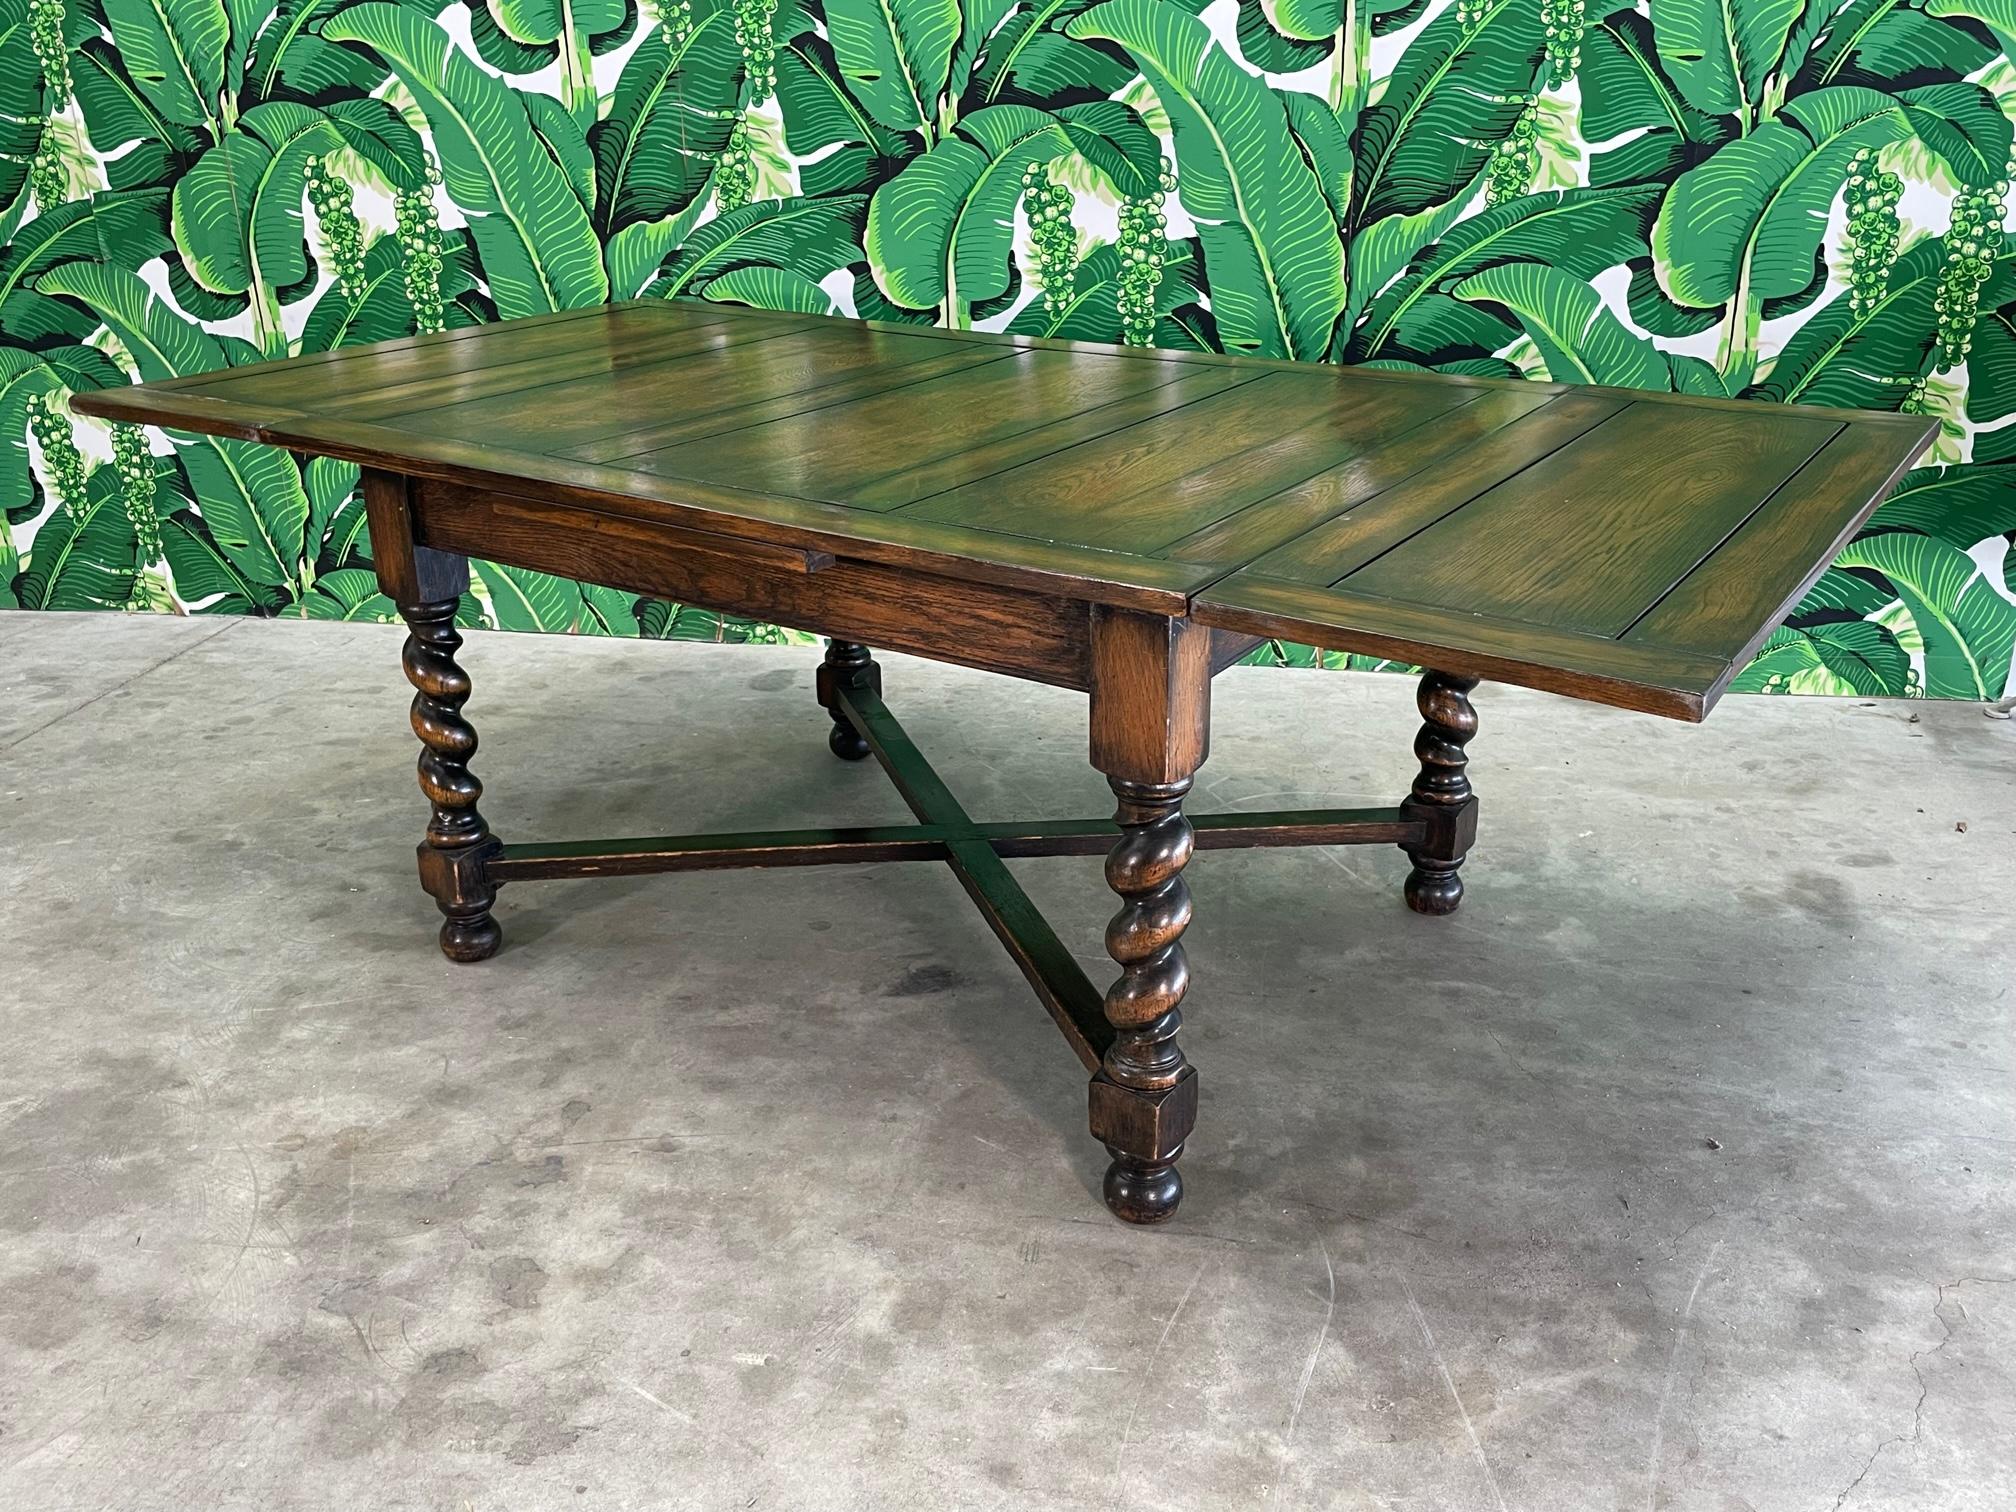 Carved wood dining table in Spanish colonial style. Heavy and substantial. Good vintage condition with imperfections consistent with age, see photos for condition details. Holds 2 retractable leaves, each 16